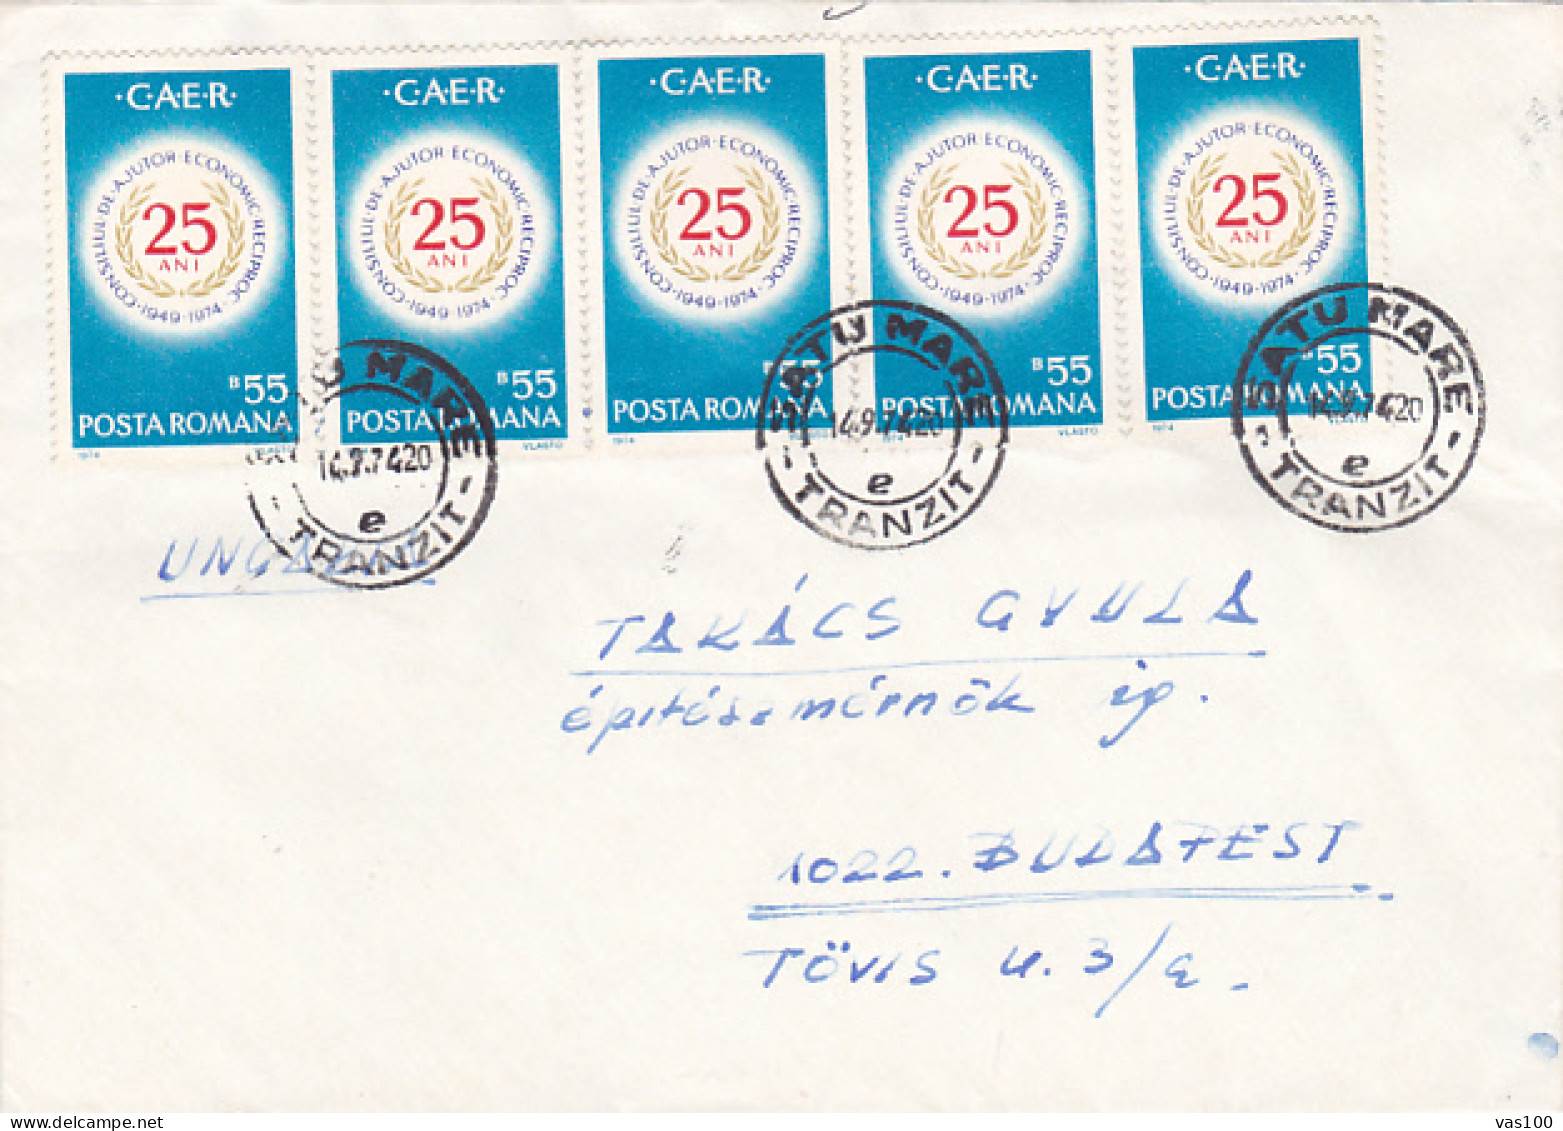 CAER- ECONOMIC COOPERATION COUNCIL, STAMPS ON COVER, 1974, ROMANIA - Lettres & Documents